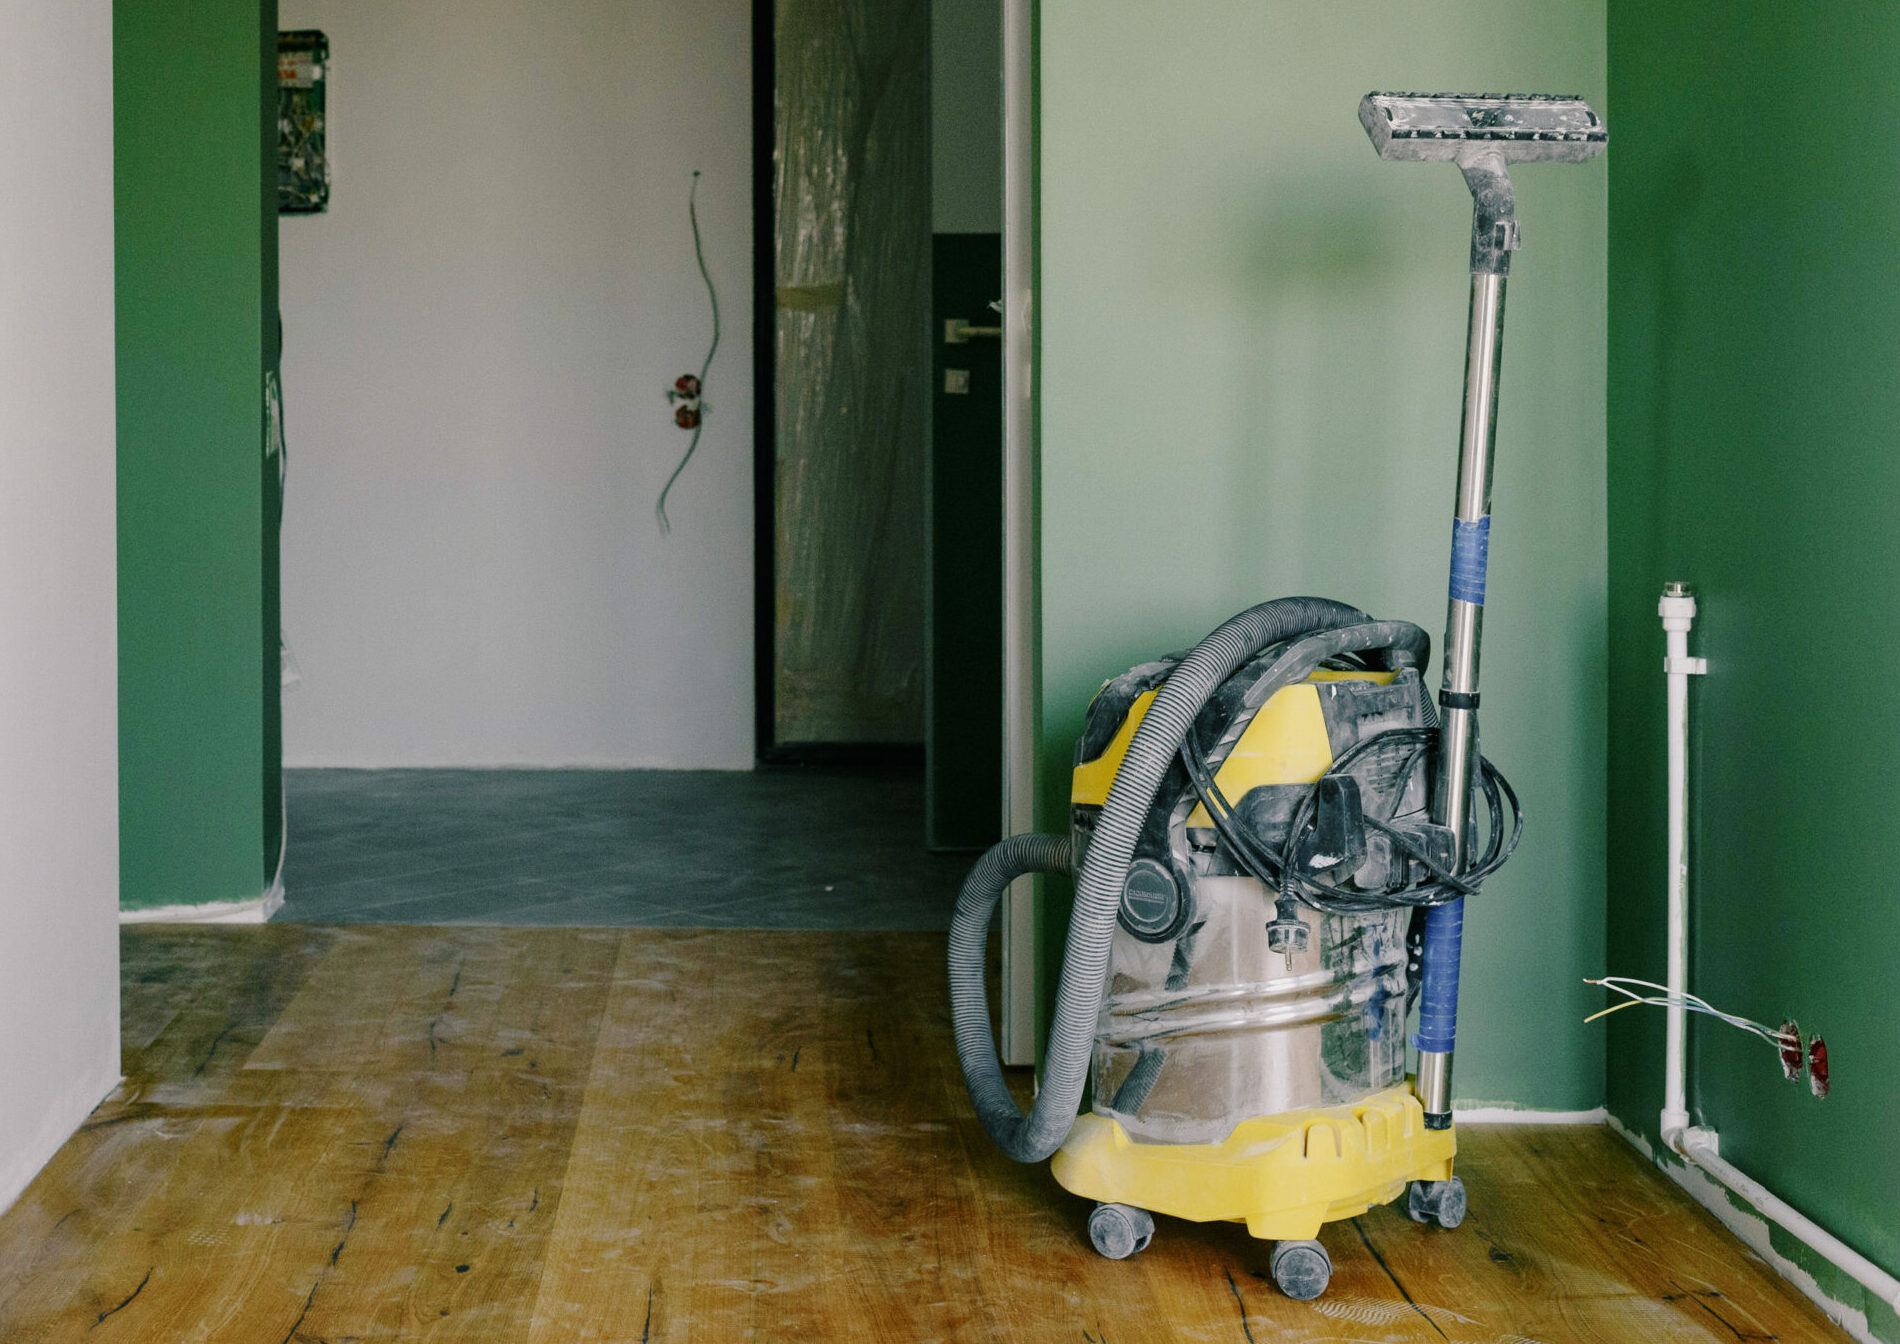 Vacuum cleaner placed in room